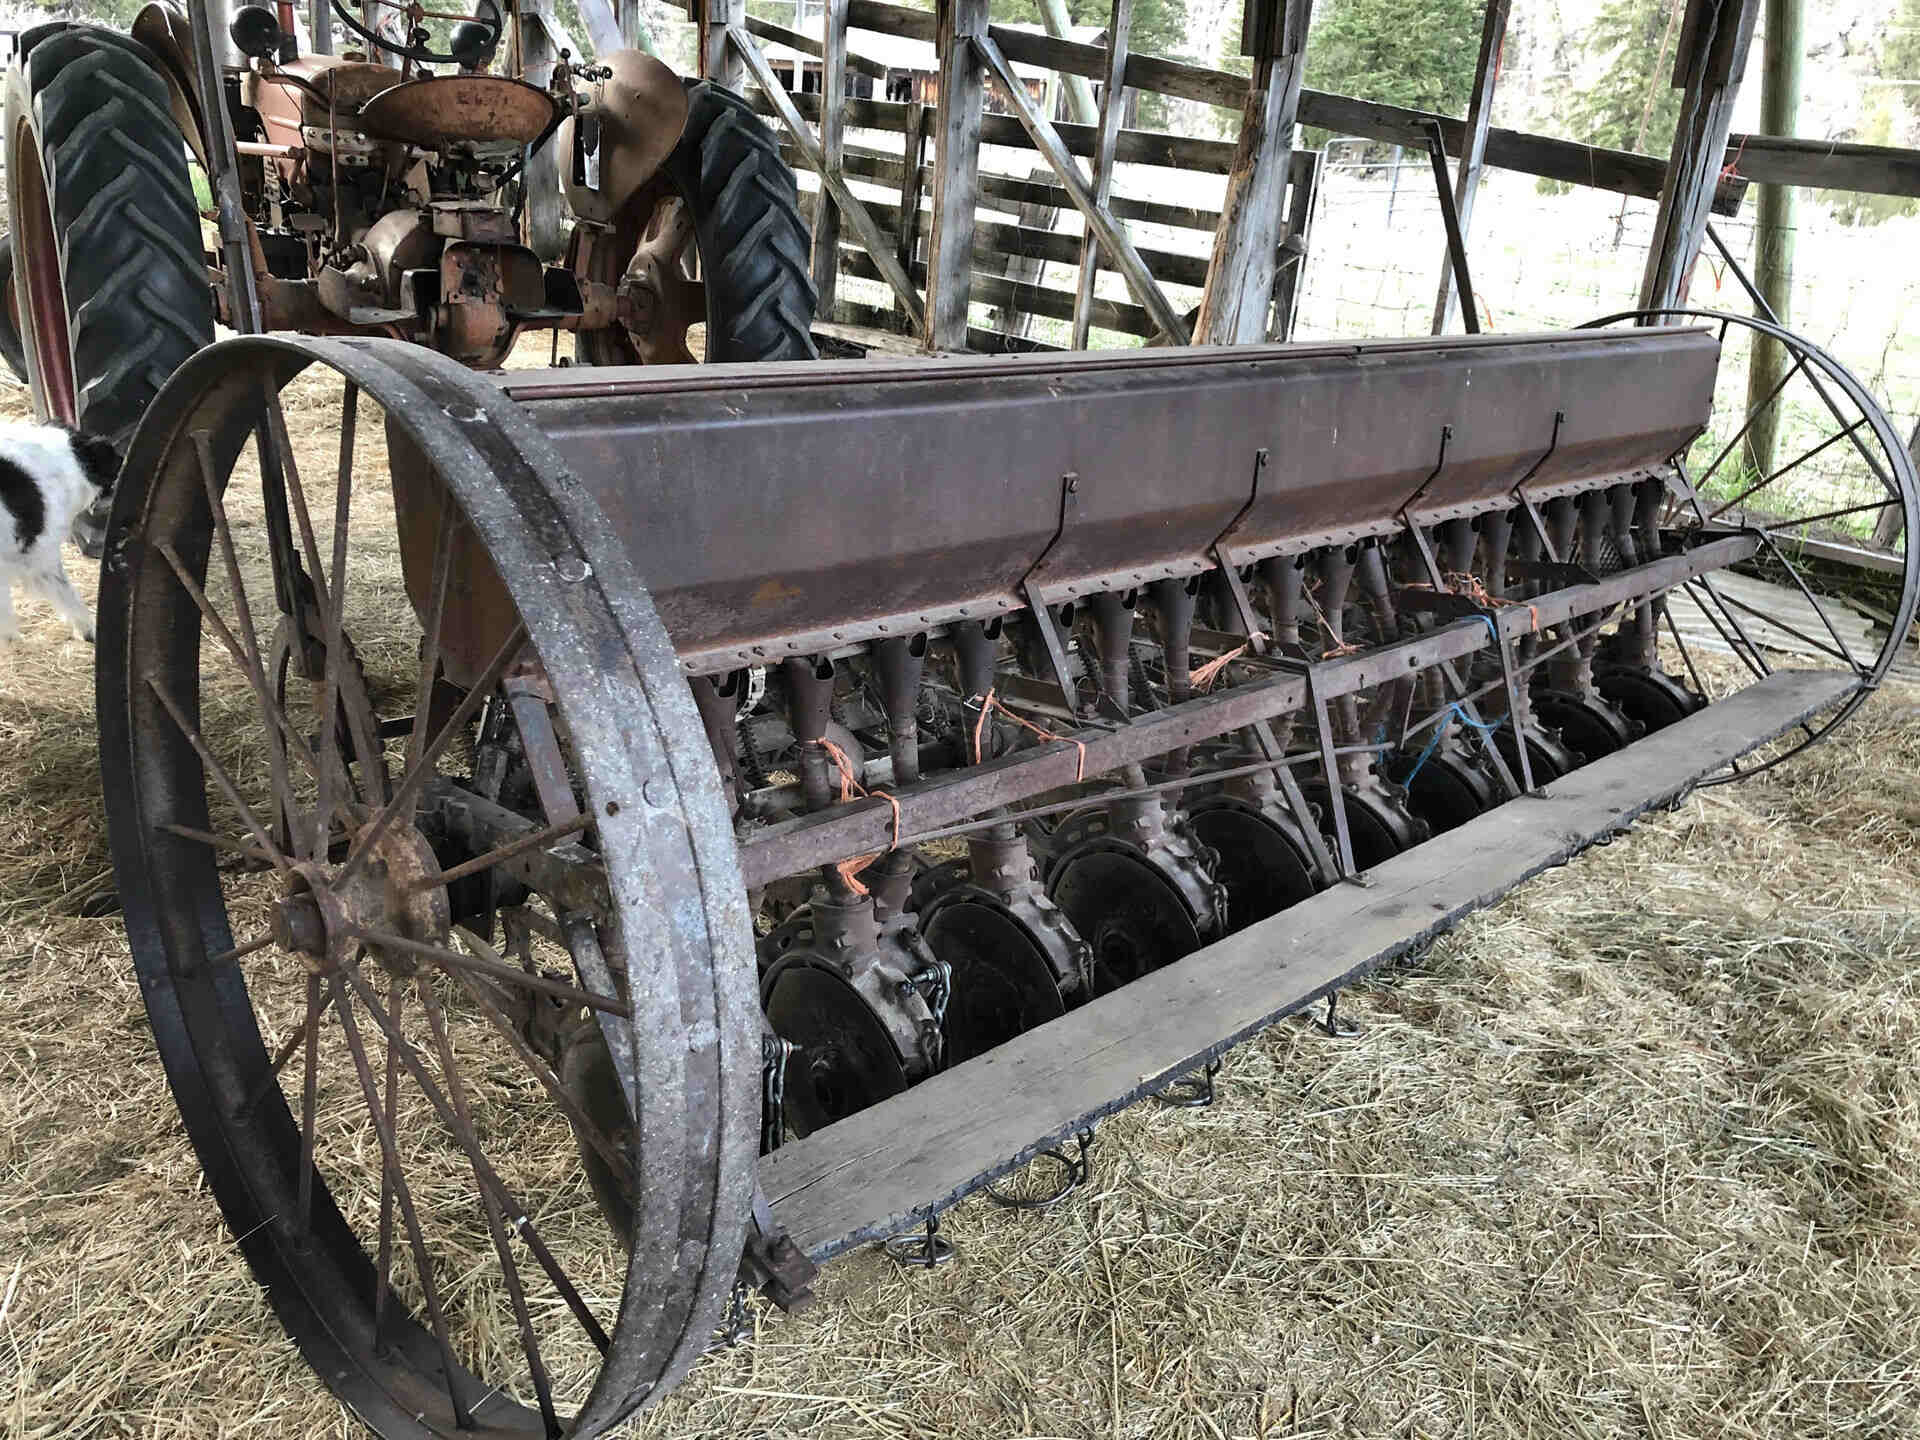 Where And When Was The Seed Drill Invented